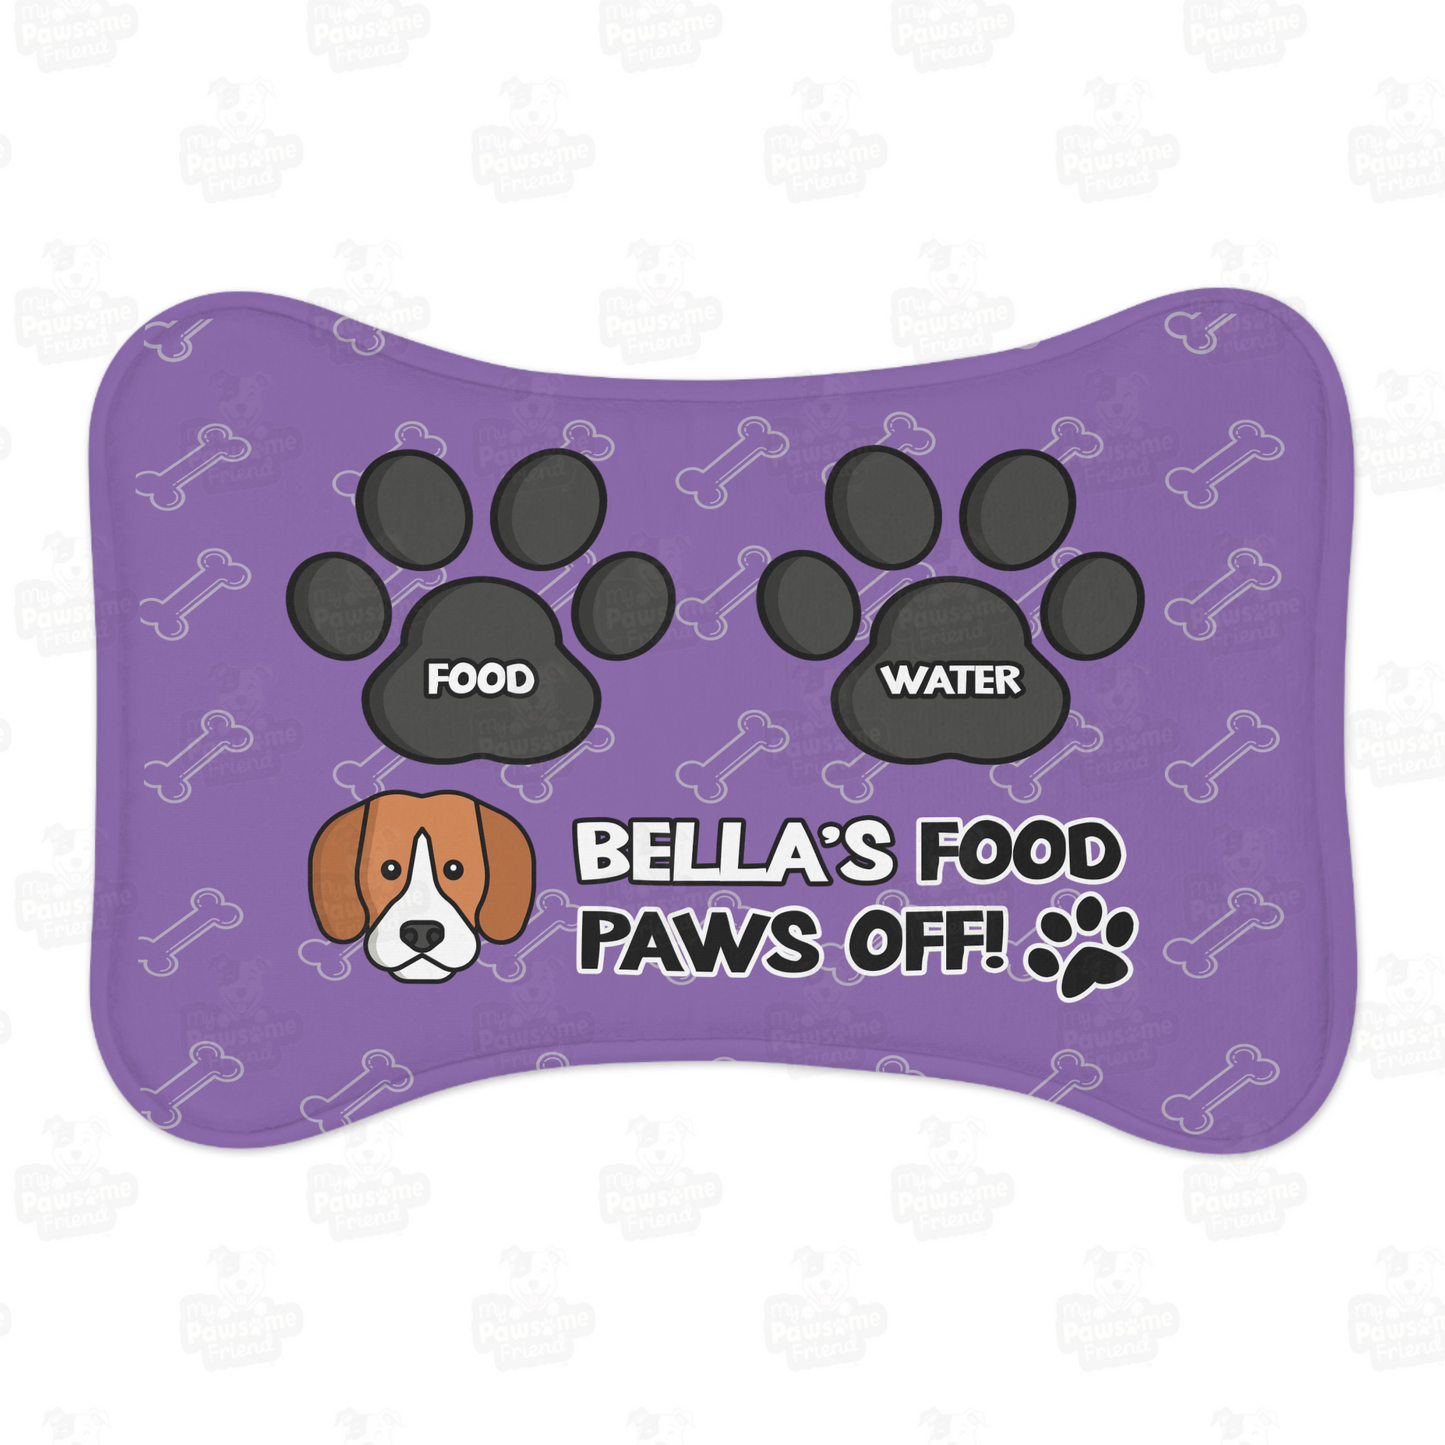 a personalized dog food mat with the a bone shape, two big paws with the words "Food" and "Water" at the top. And the face of a cute dog next to the words "Dog's Food Paws Off!". Color of the pet feeding mat is purple